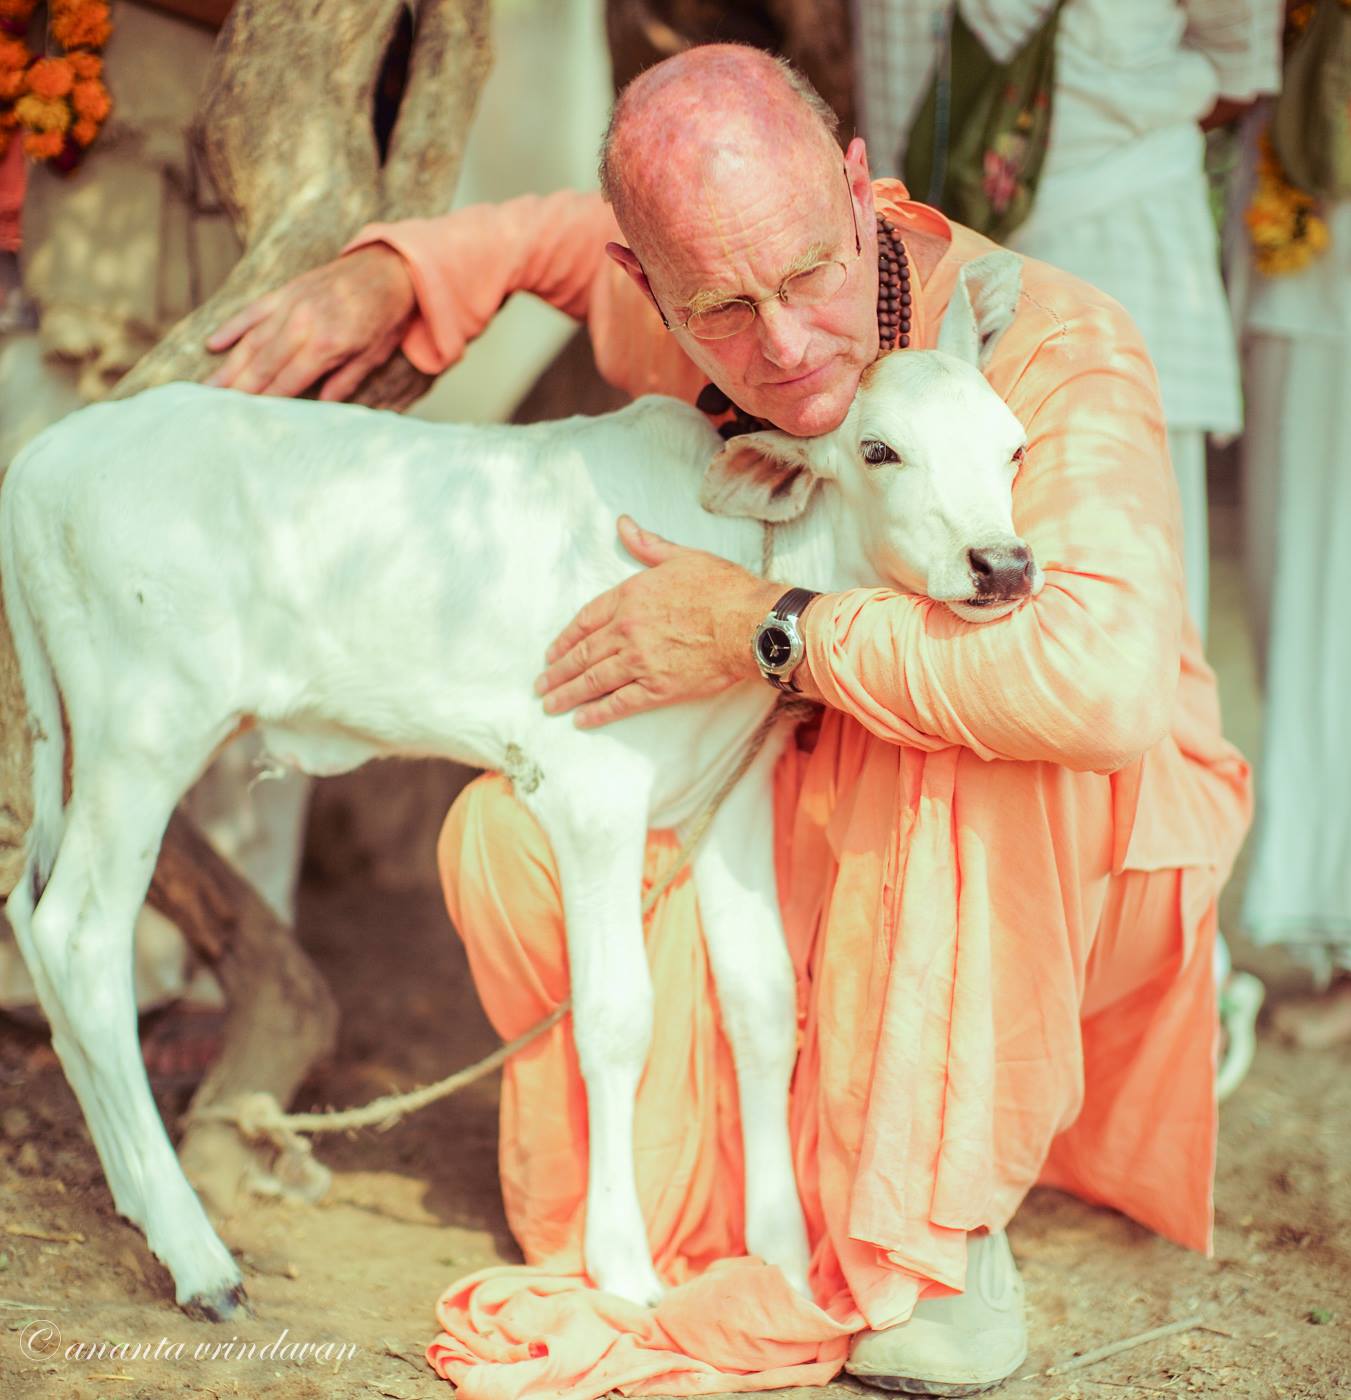 Indradyumna Swami's Heart - articles describing encounters and experiences with Indradyumna Swami